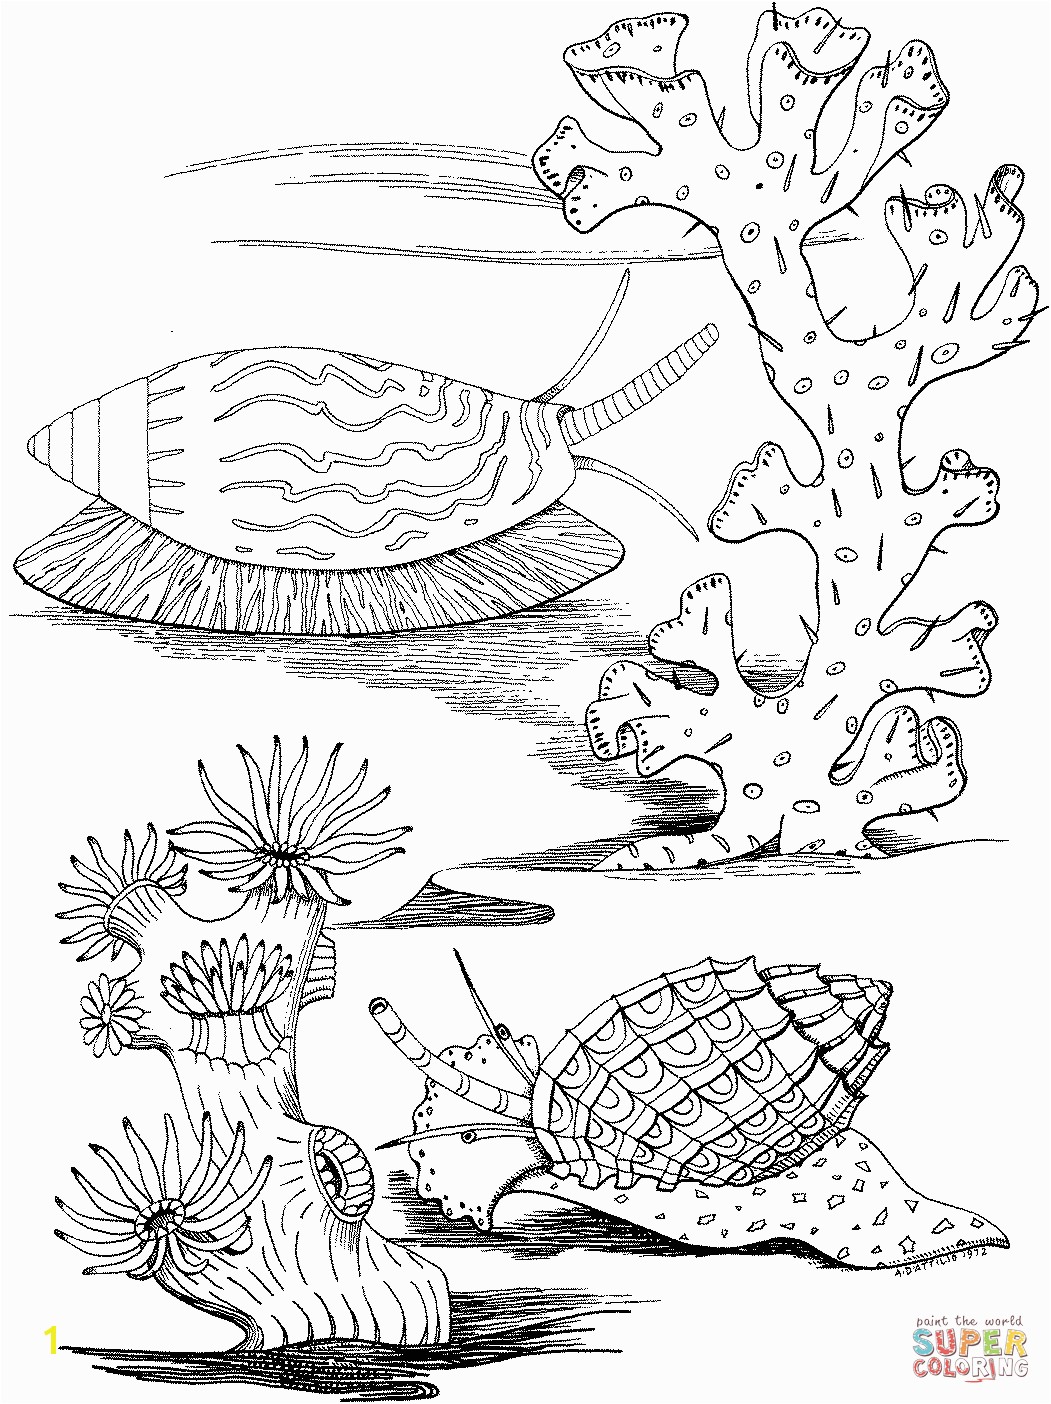 Algae Coloring Pages Advice Algae Coloring Pages Sea Snails Page Free Printable